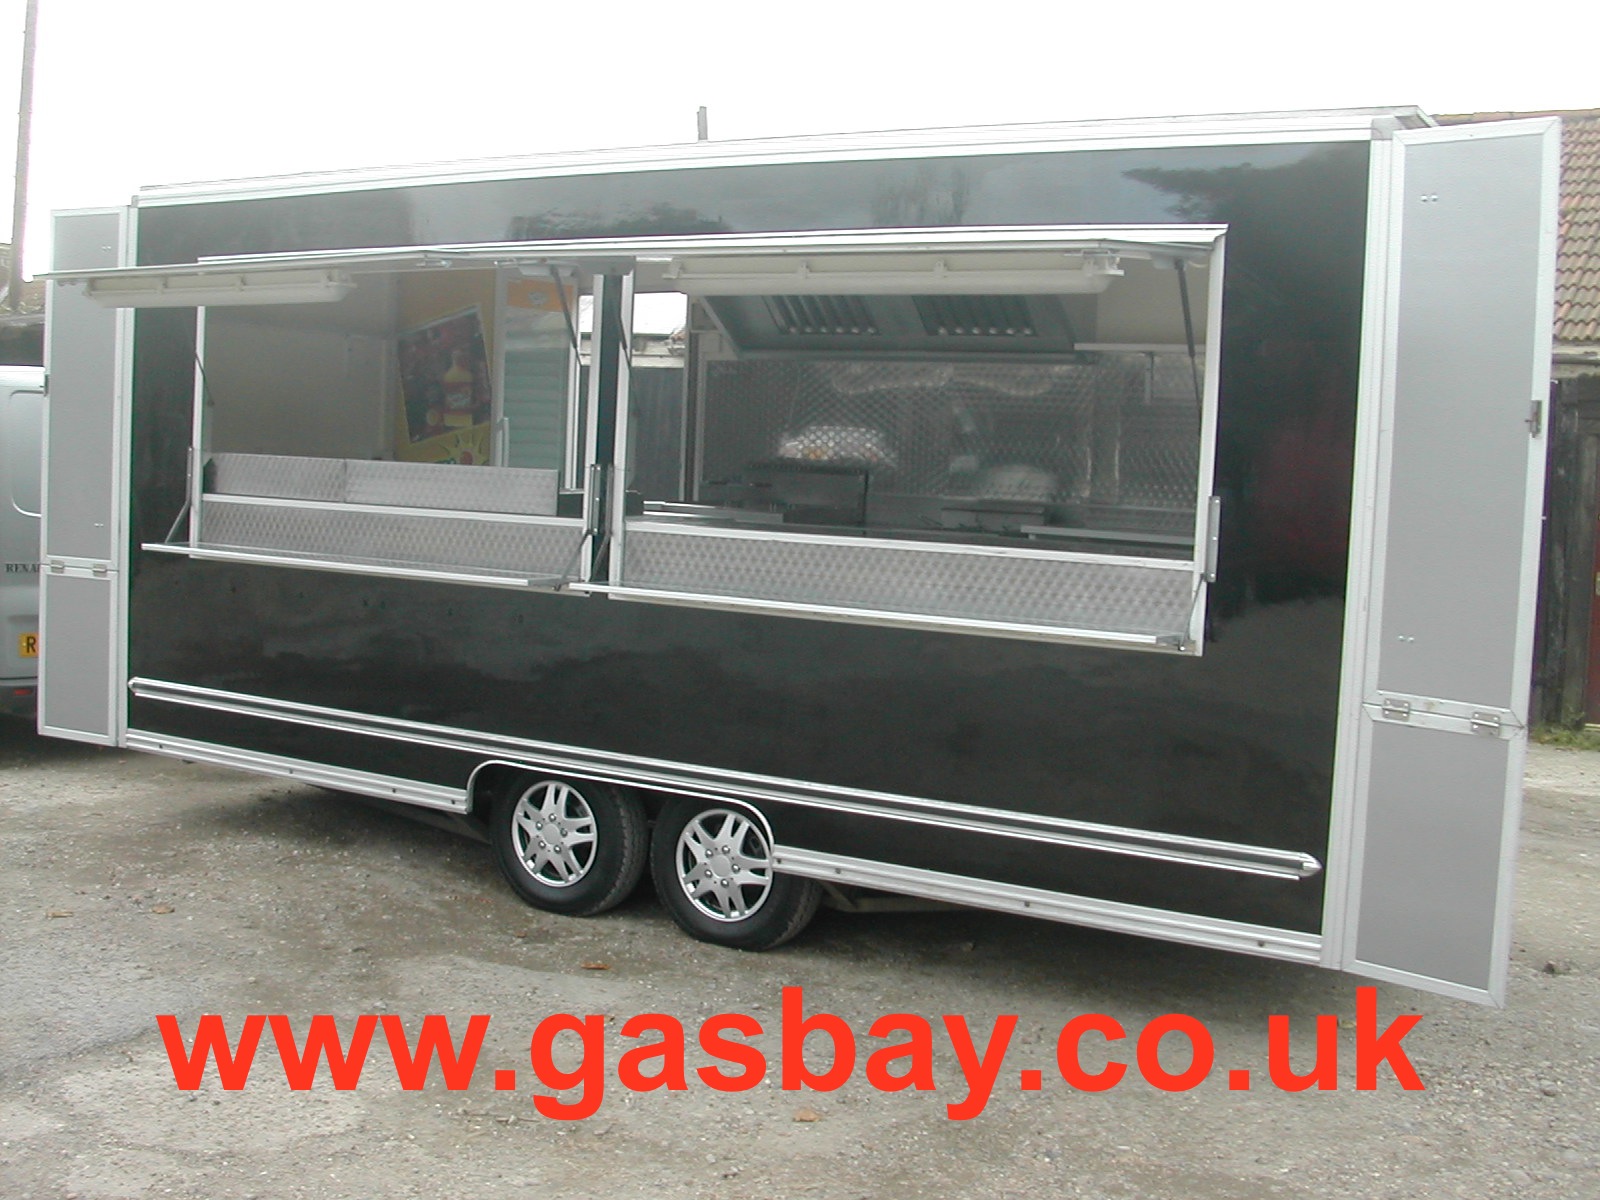 catering trailer manufacturers uk